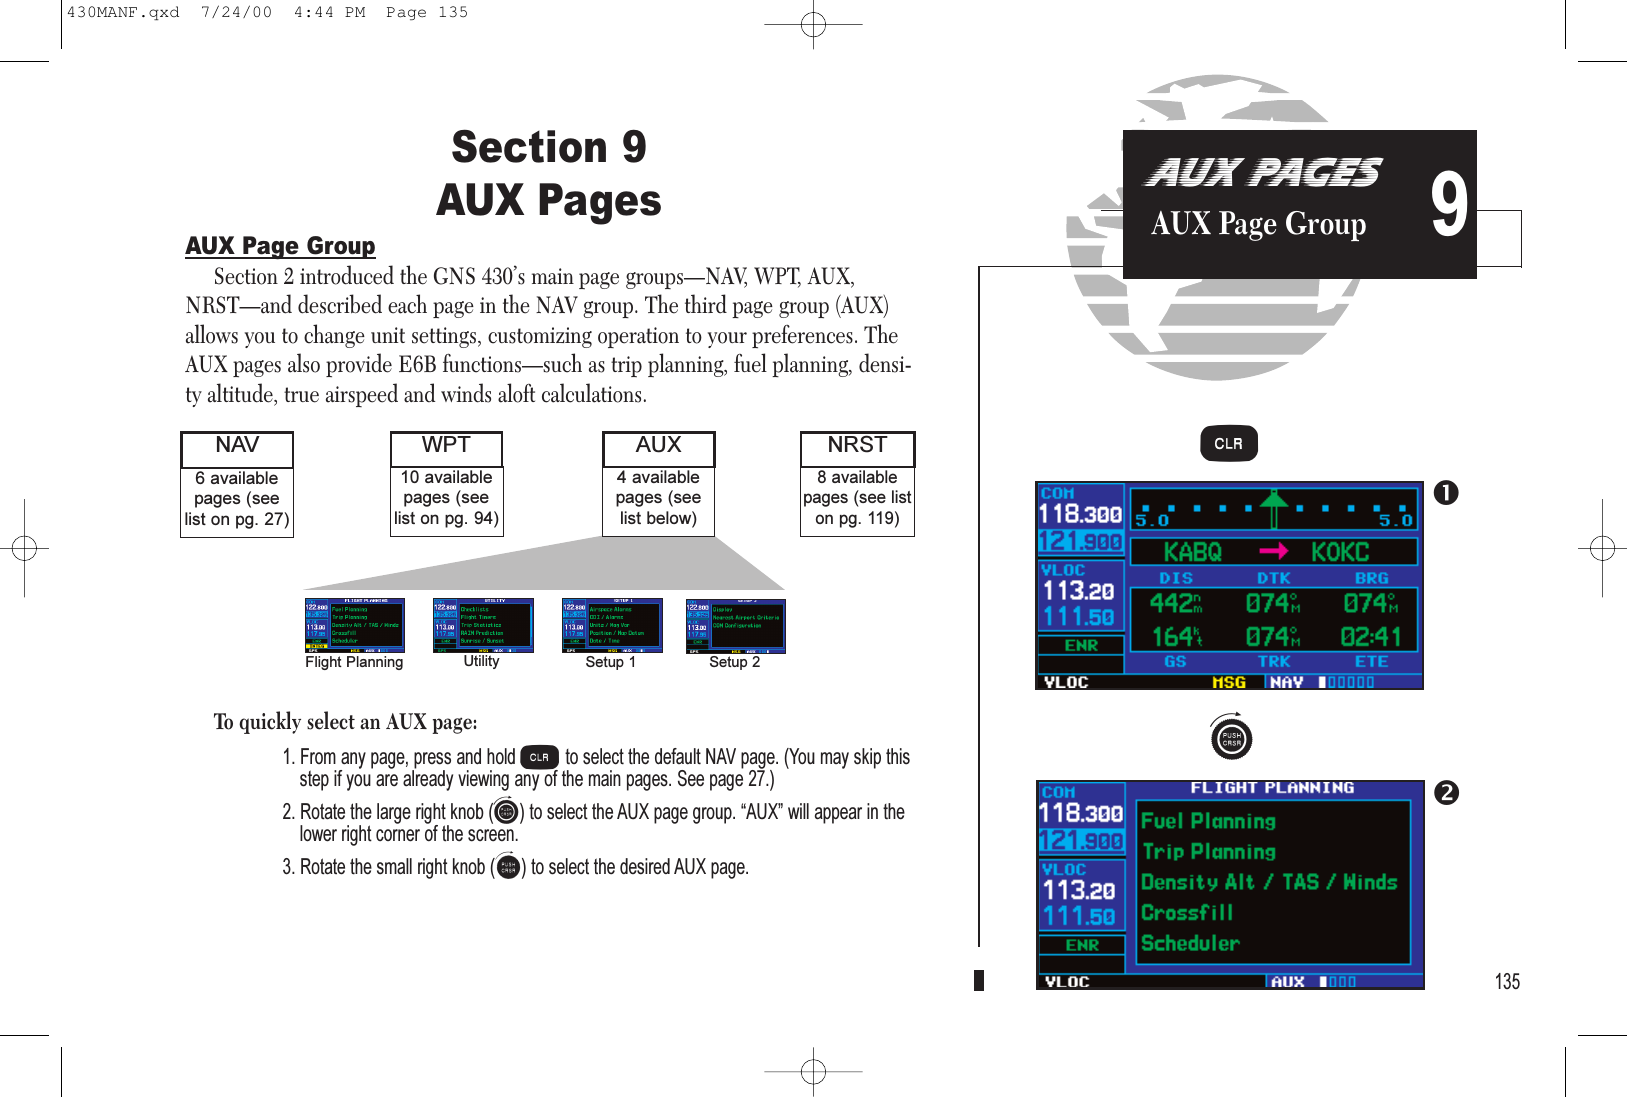 Section 9AUX PagesAUX Page GroupSection 2 introduced the GNS 430’s main page groups—NAV, WPT, AUX,NRST—and described each page in the NAV group. The third page group (AUX)allows you to change unit settings, customizing operation to your preferences. TheAUX pages also provide E6B functions—such as trip planning, fuel planning, densi-ty altitude, true airspeed and winds aloft calculations.To quickly select an AUX page:1. From any page, press and hold cto select the default NAV page. (You may skip thisstep if you are already viewing any of the main pages. See page 27.)2. Rotate the large right knob (d) to select the AUX page group. AUX will appear in thelower right corner of the screen.3. Rotate the small right knob (a) to select the desired AUX page.135AUX PAGESAUX Page Group 98 availablepages (see liston pg. 119)6 availablepages (seelist on pg. 27)NAV NRST4 availablepages (seelist below)AUX10 availablepages (seelist on pg. 94)WPTFlight Planning Utility Setup 1 Setup 2dc430MANF.qxd  7/24/00  4:44 PM  Page 135